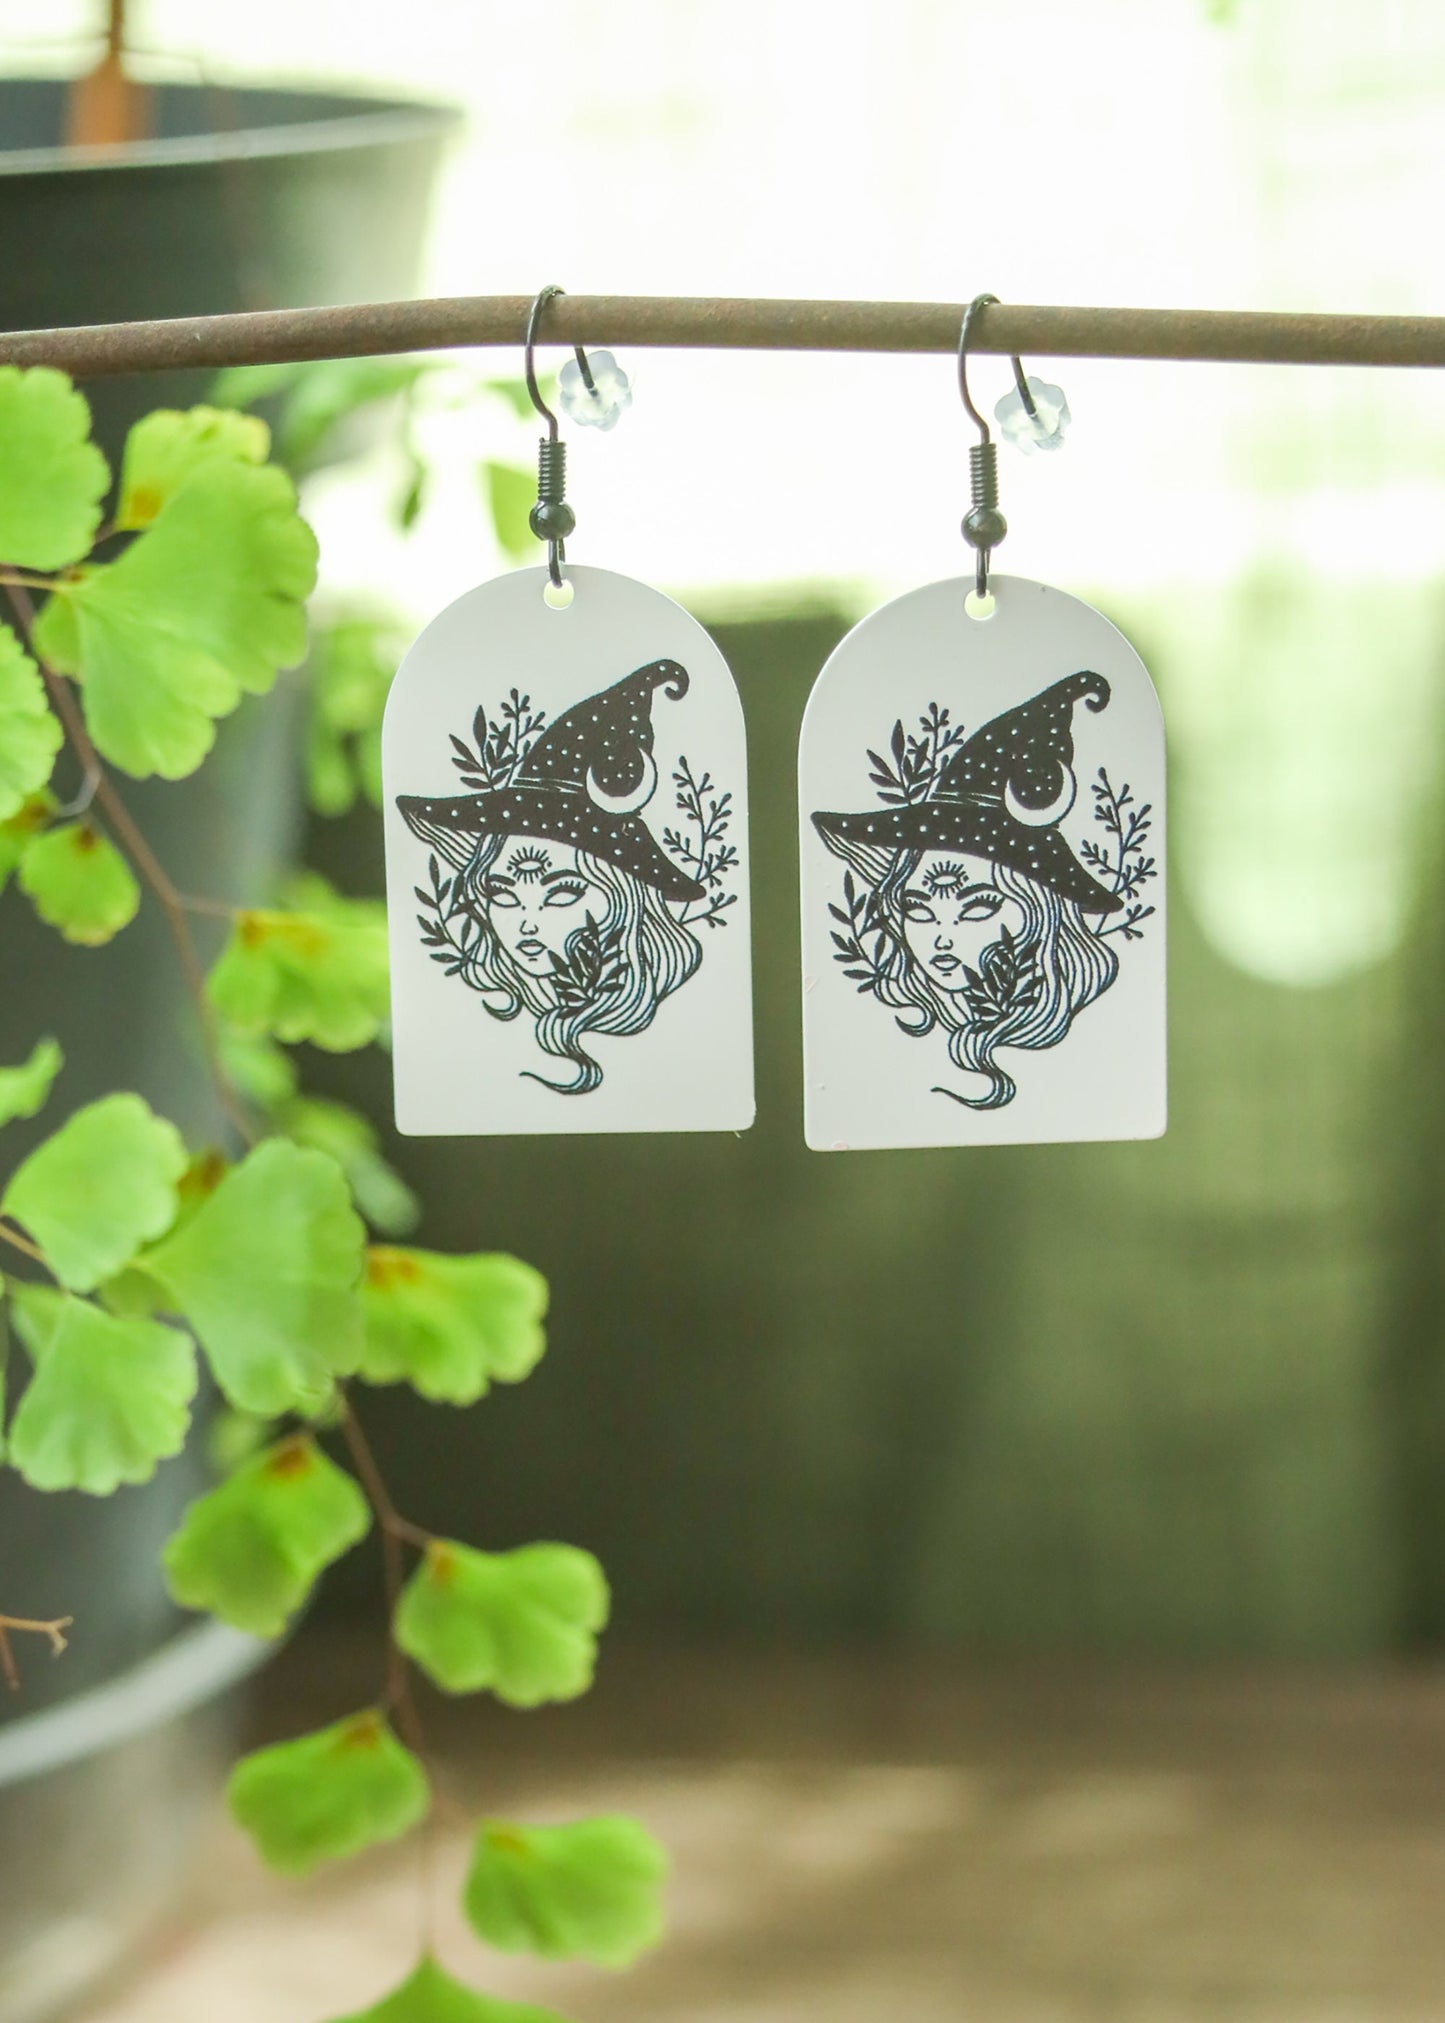 Witchy Enamel Earrings | Gothic Halloween Arch Dangles | Stainless Steel Charm Sterling Silver Ear Wire | Spooky Kawaii Cottagecore Jewelry